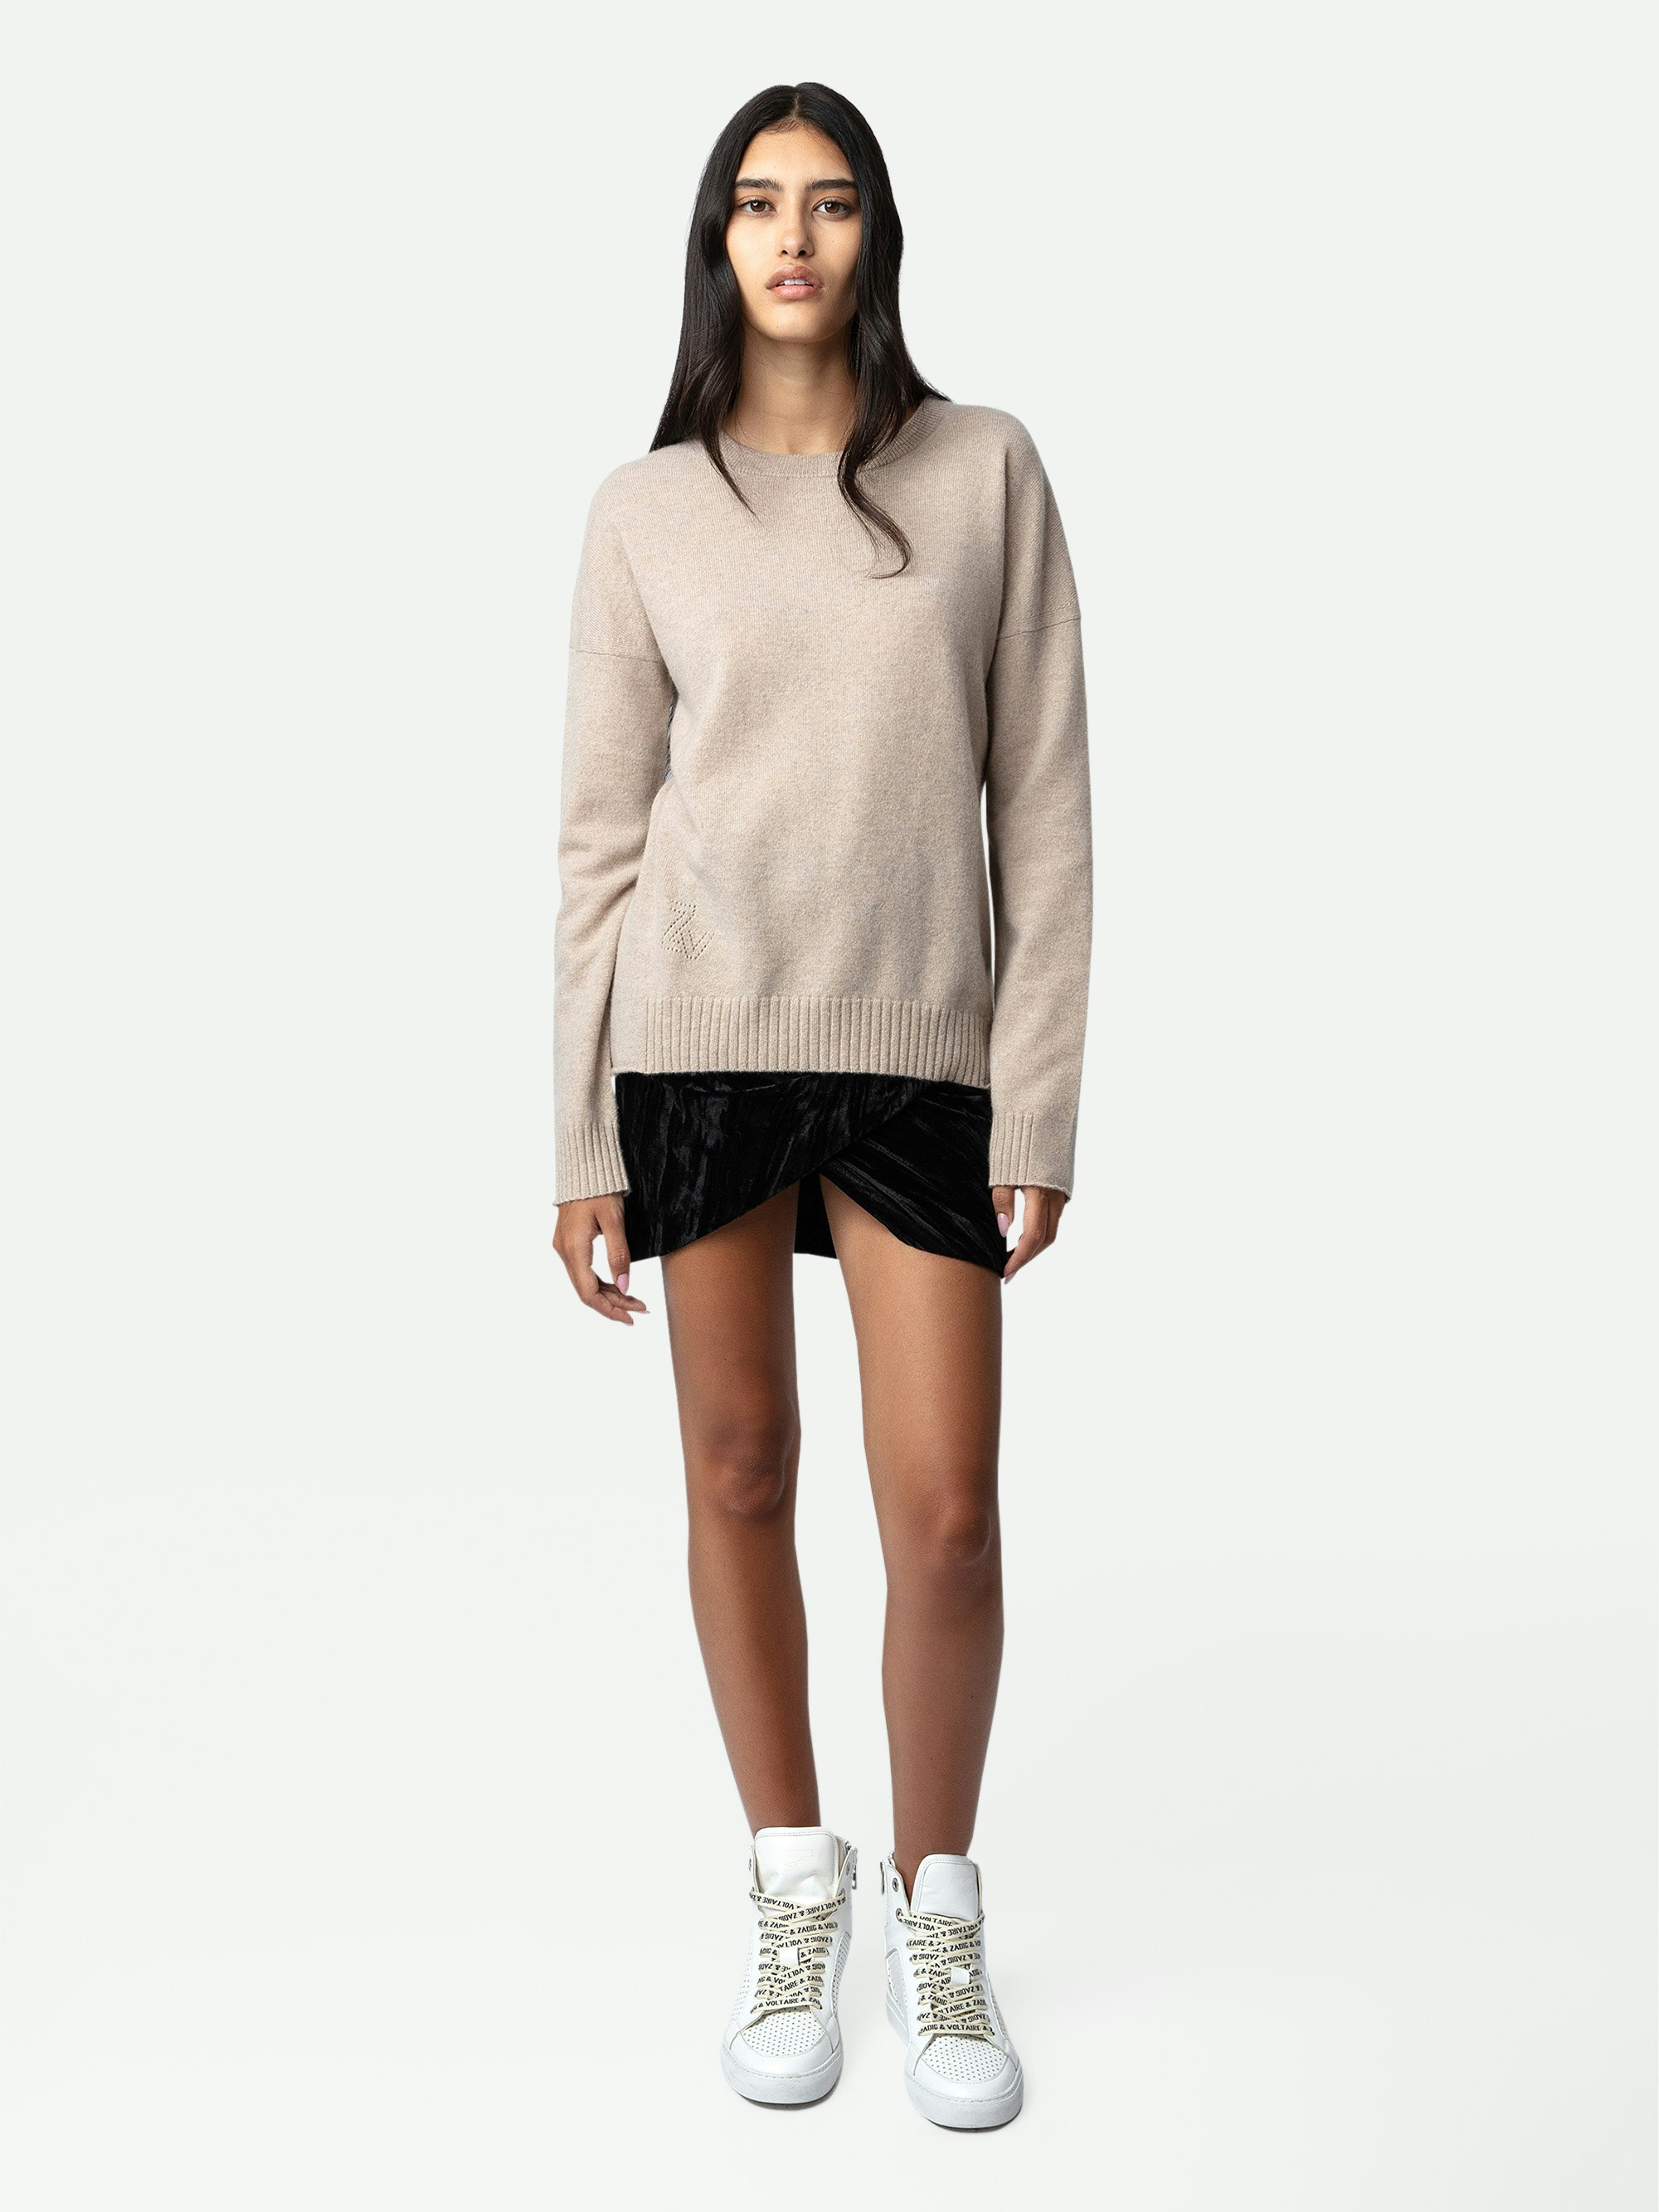 Cici Patch Jumper 100% Cashmere - Women’s beige 100% cashmere jumper with embroidered star patch on the elbows.